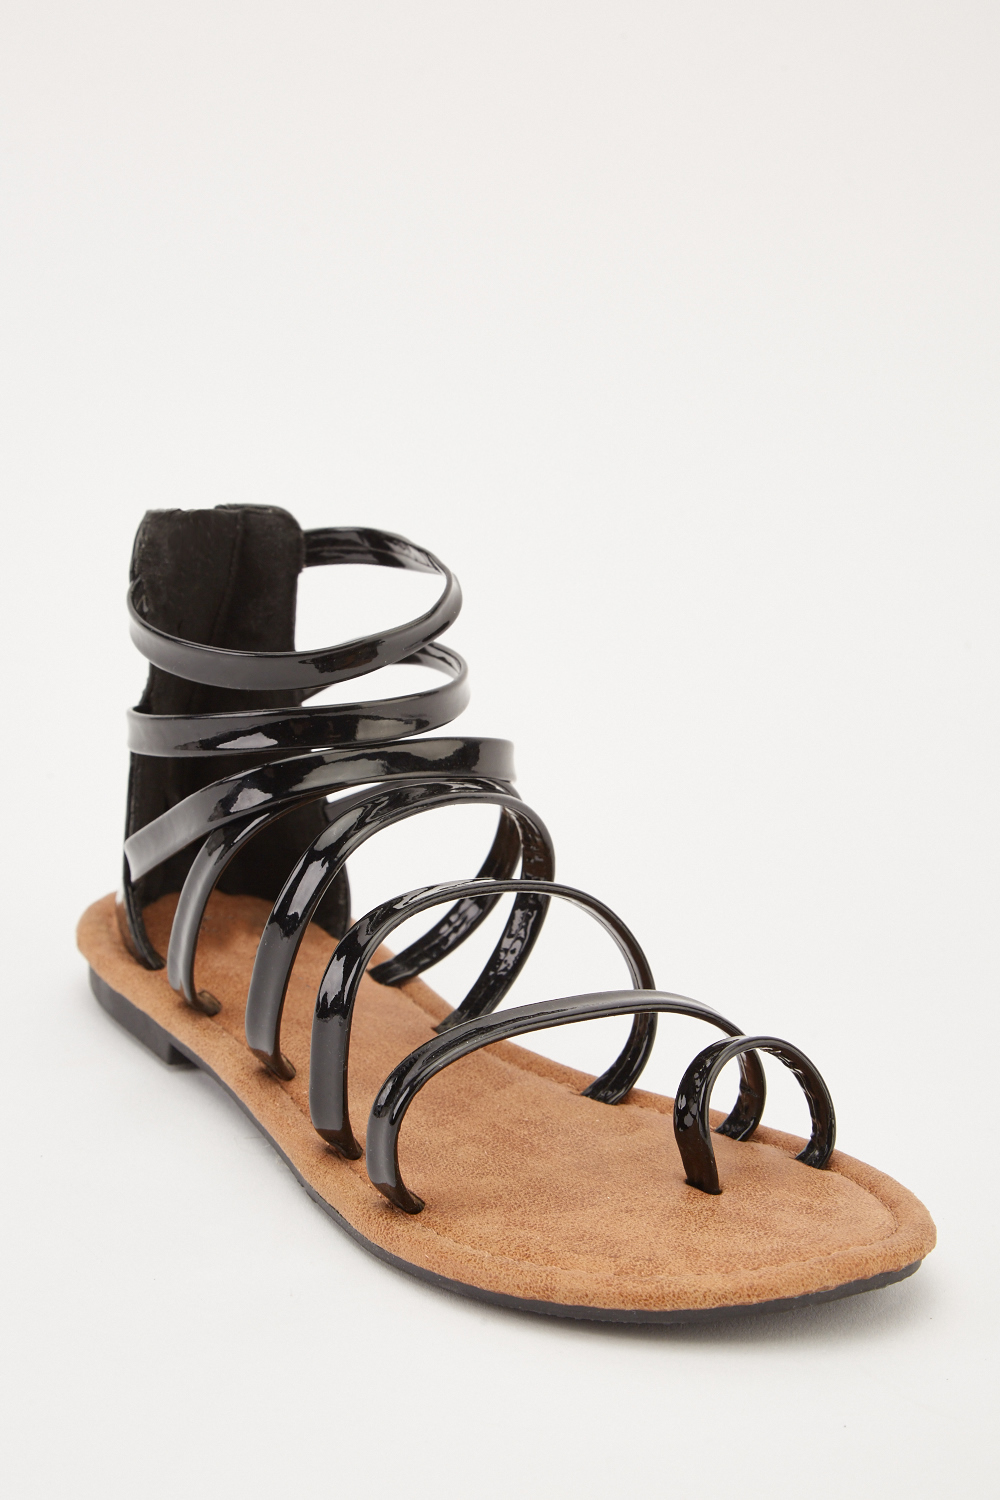 Strappy Gladiator Style Sandals - Just $3